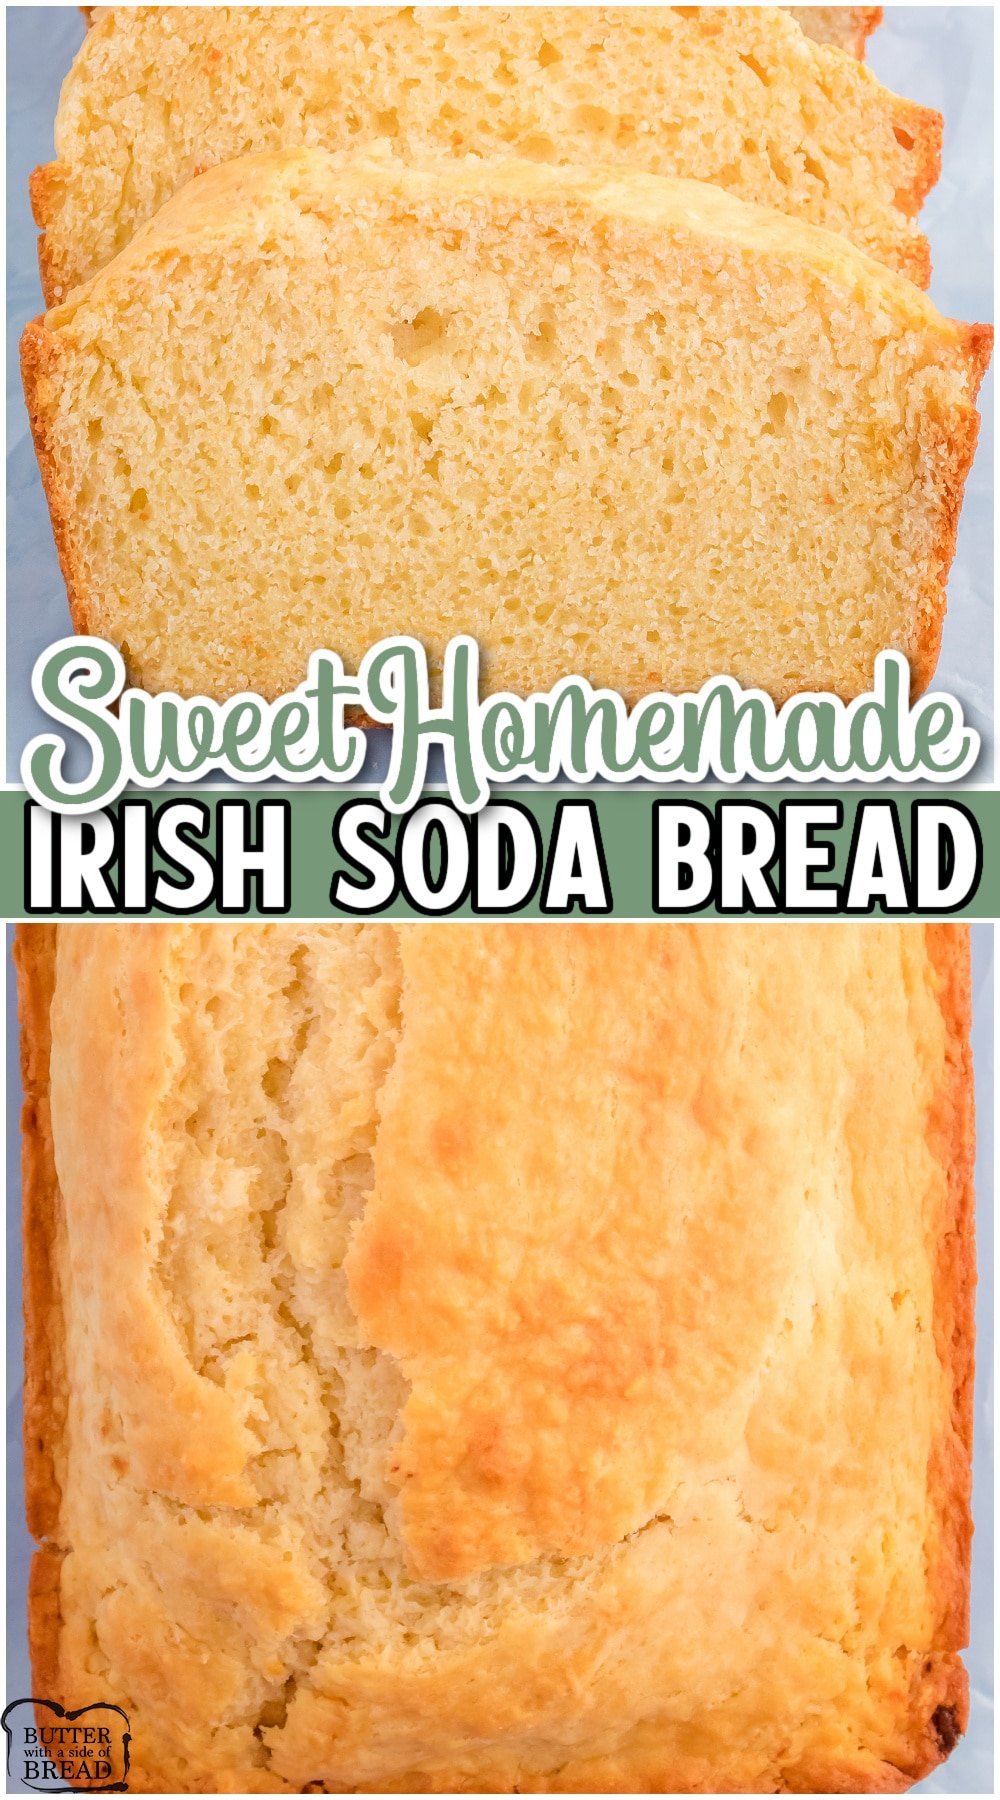 Sweet Irish Soda Bread is a fun twist on classic St. Patrick's day recipe! This easy Irish soda bread is more sweet and moist than traditional fare and is lovely served warm with butter.